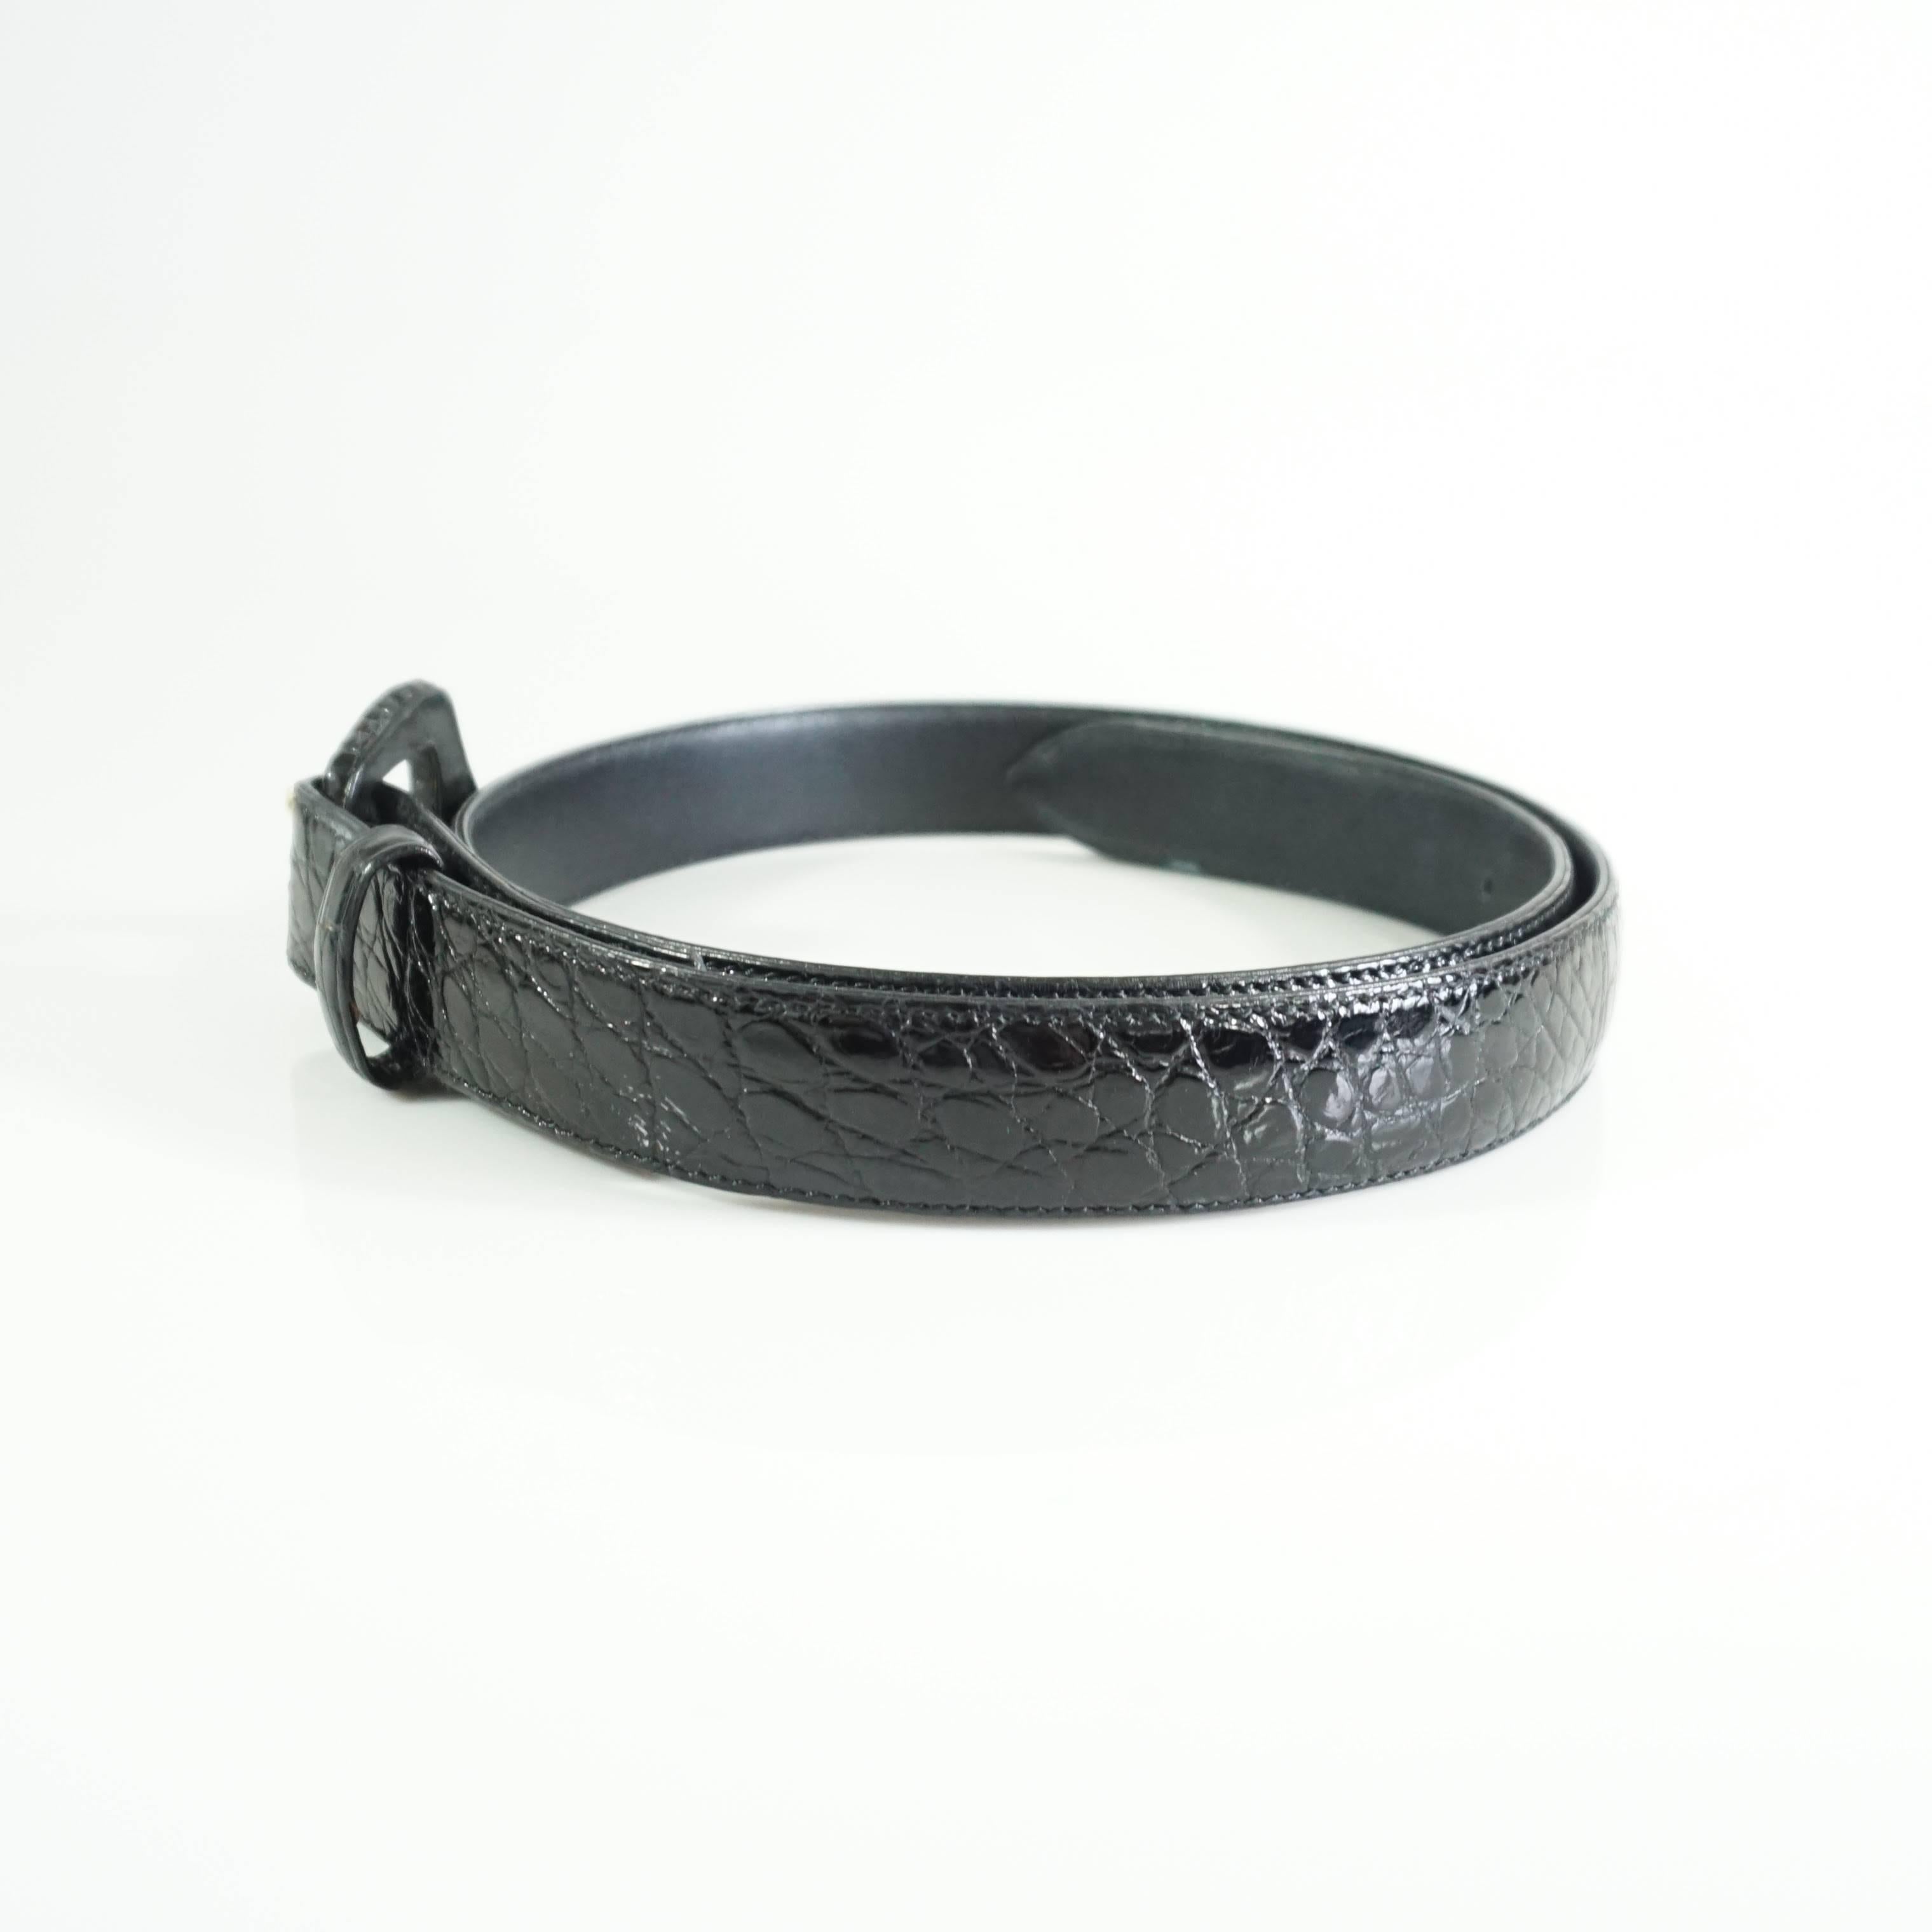 This Lana Marks black alligator belt has a sleek look. The entirety of the belt is alligator with the exception of the gold belt hook. The piece is in good condition with a couple small areas near the buckle that have blemishes (see the last